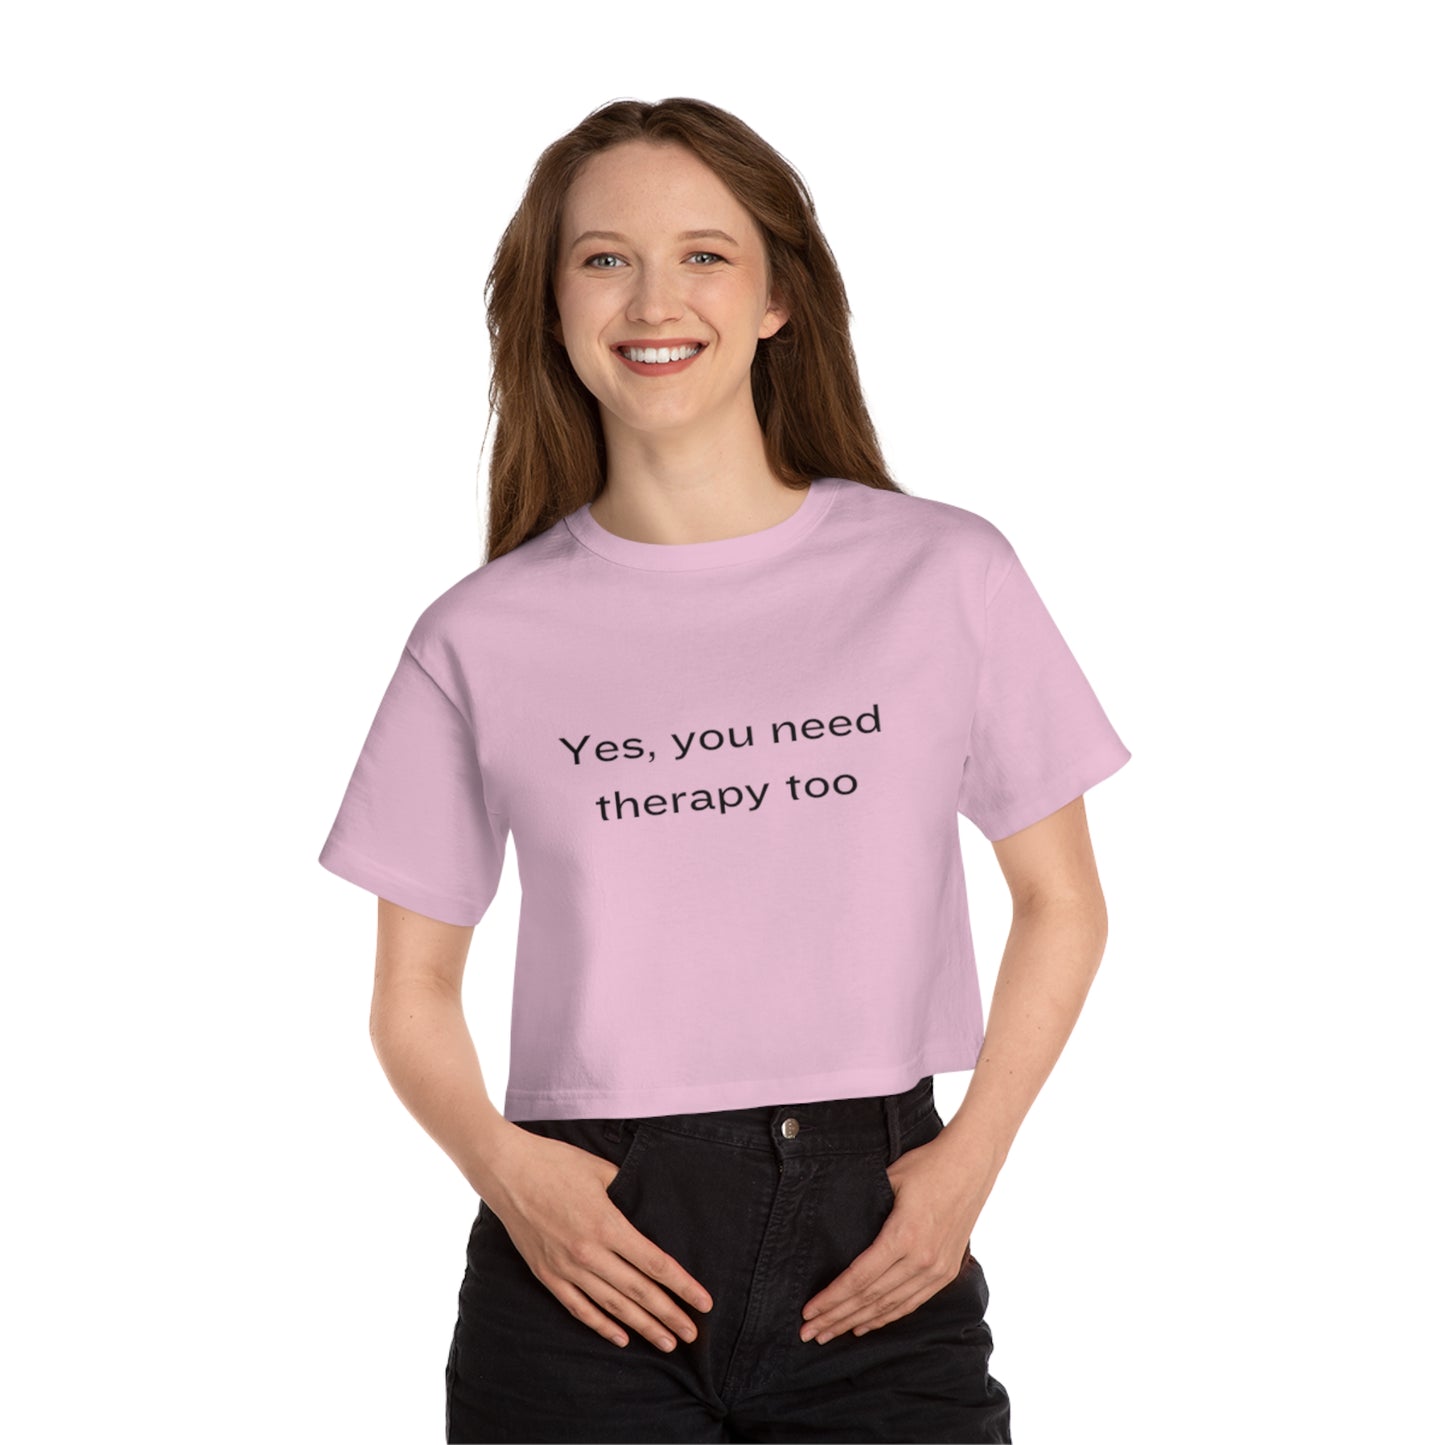 "Yes, you need therapy too" - Champion crop top